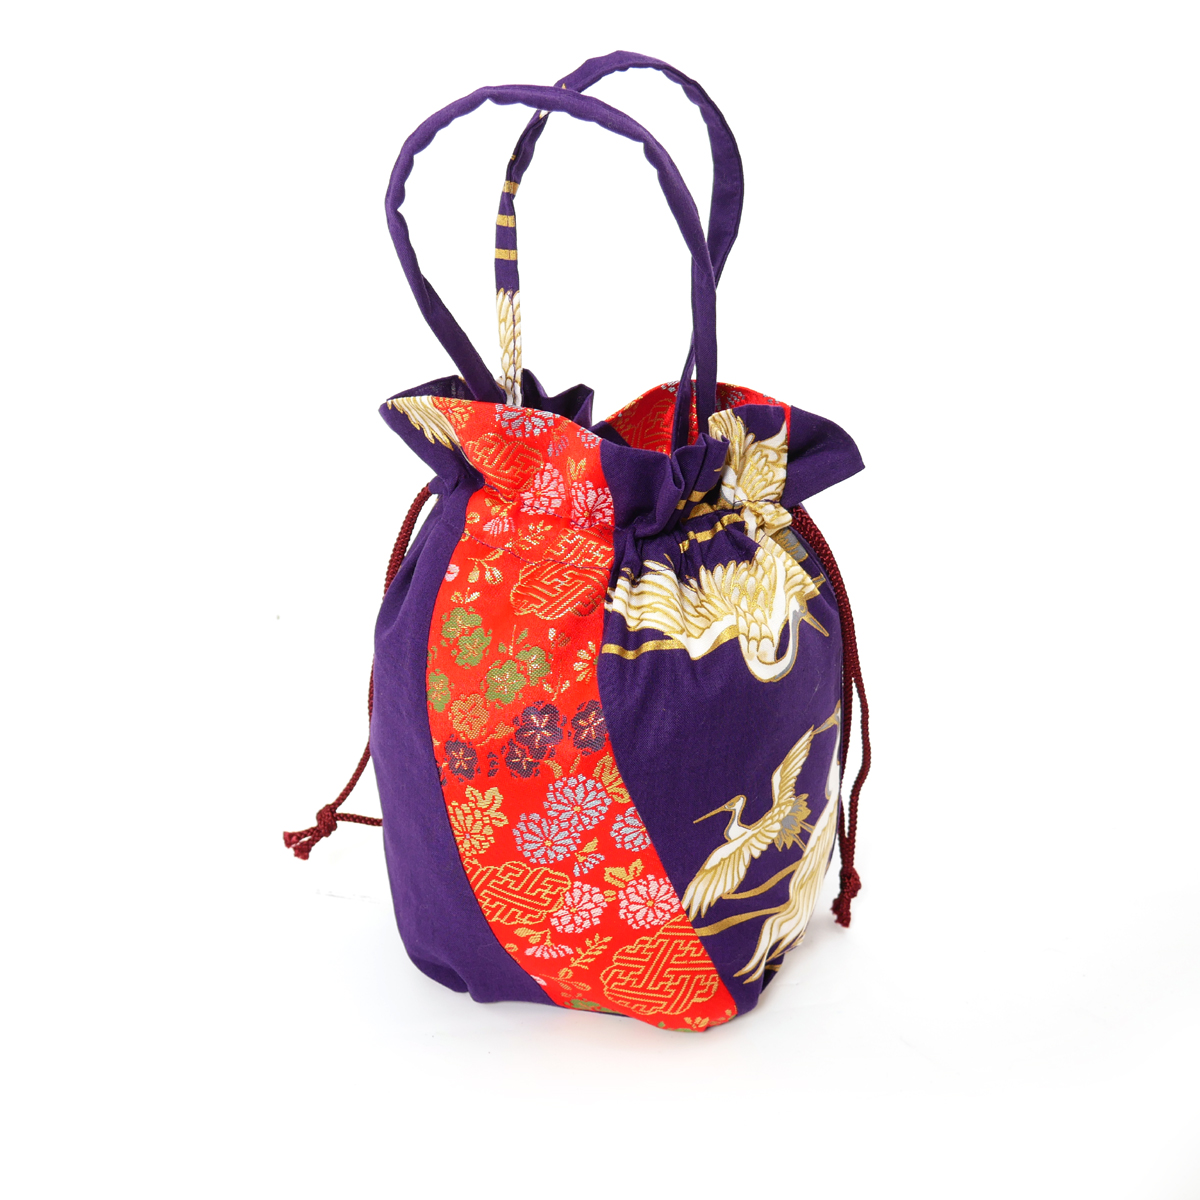 Japanese purple kimono bag in polyester cotton, POUCH, various patterns